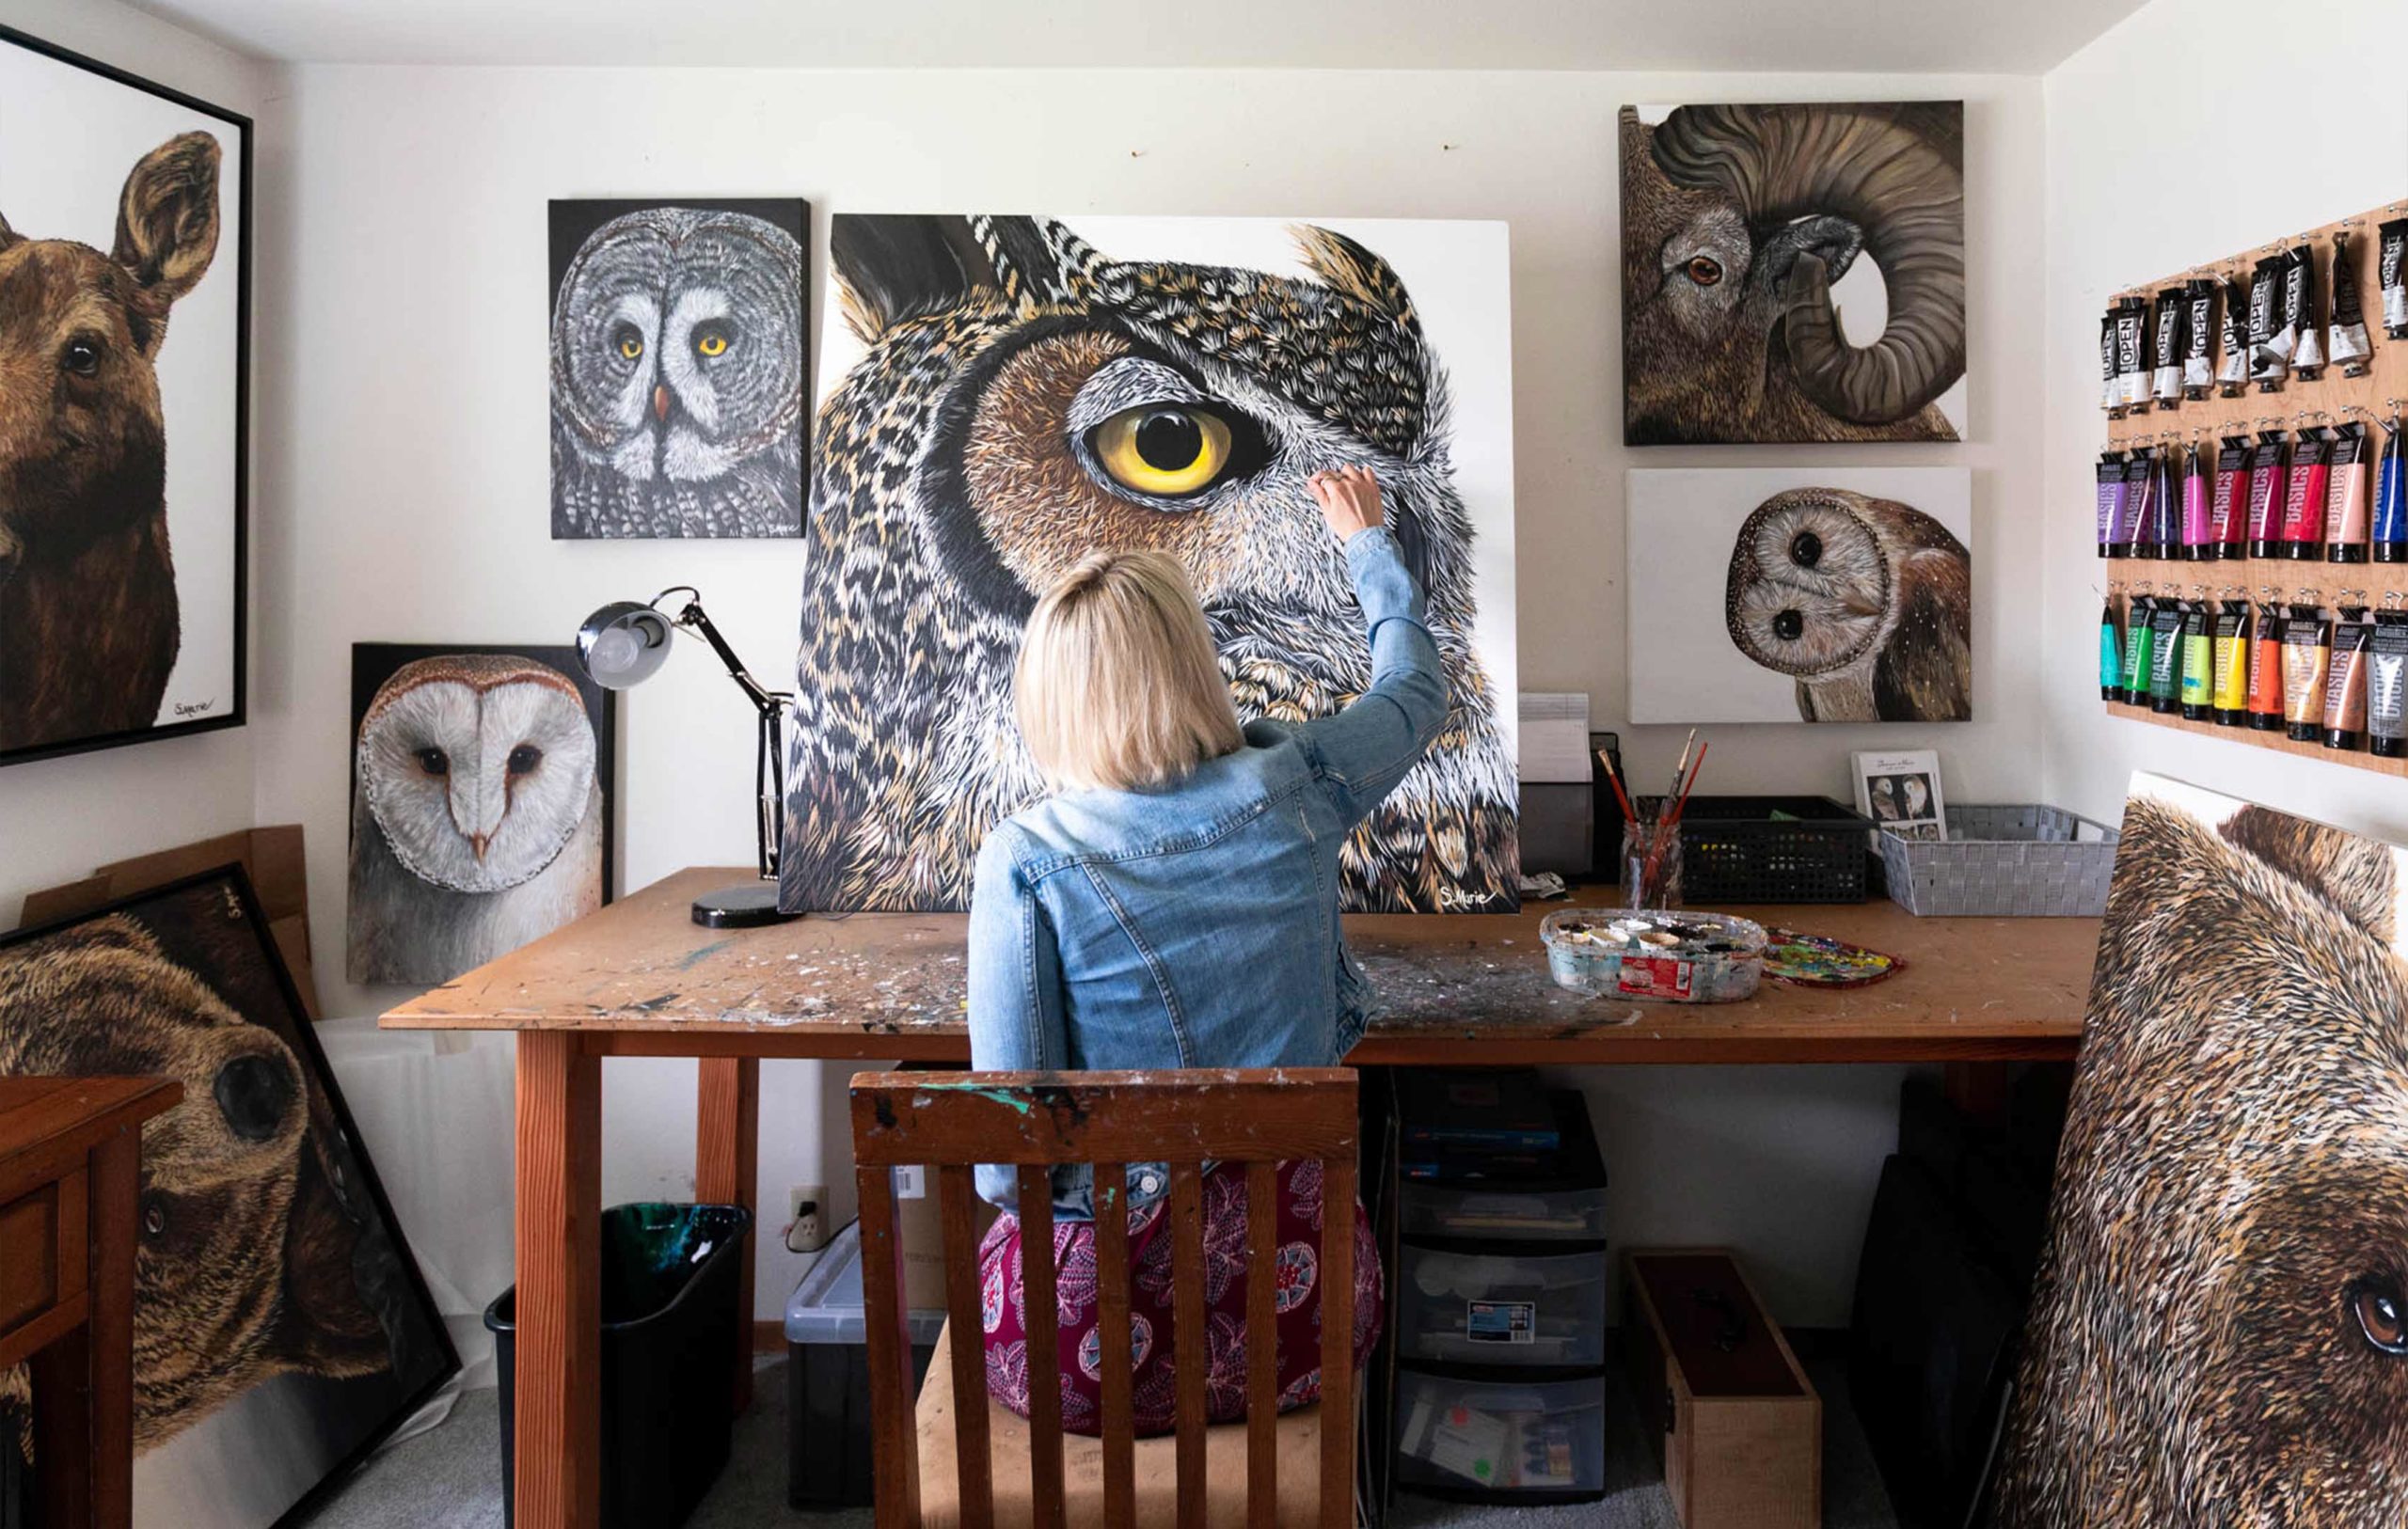 New-Thought-Wildly-Creative-Jackson-Hole-Photography-Shannon Schacht-Painting-Owl-In-Art-Studio-fullscreen